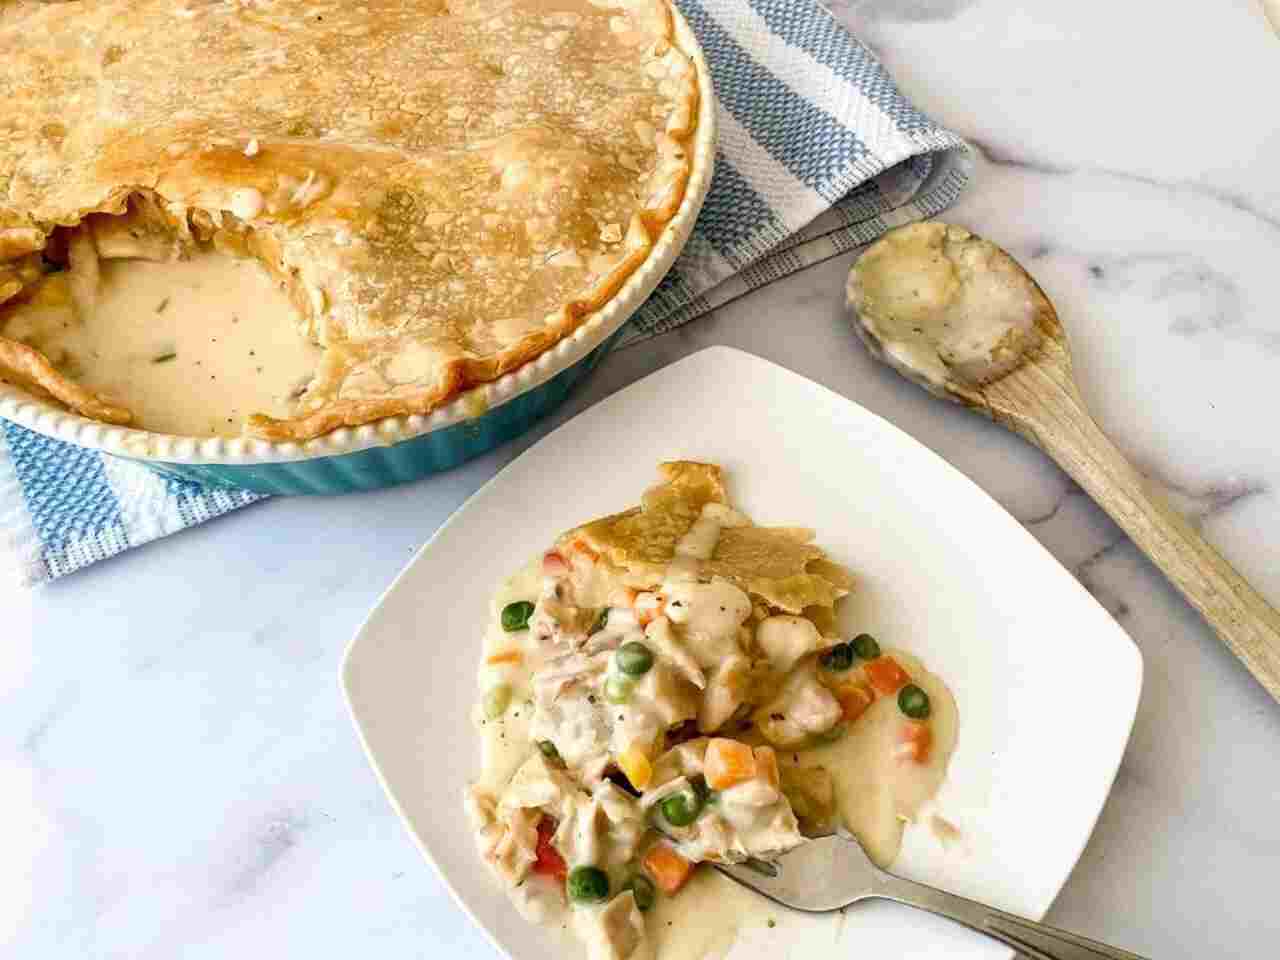 Comparing The Calorie Content To Other Frozen Chicken Pot Pies Or Homemade Versions